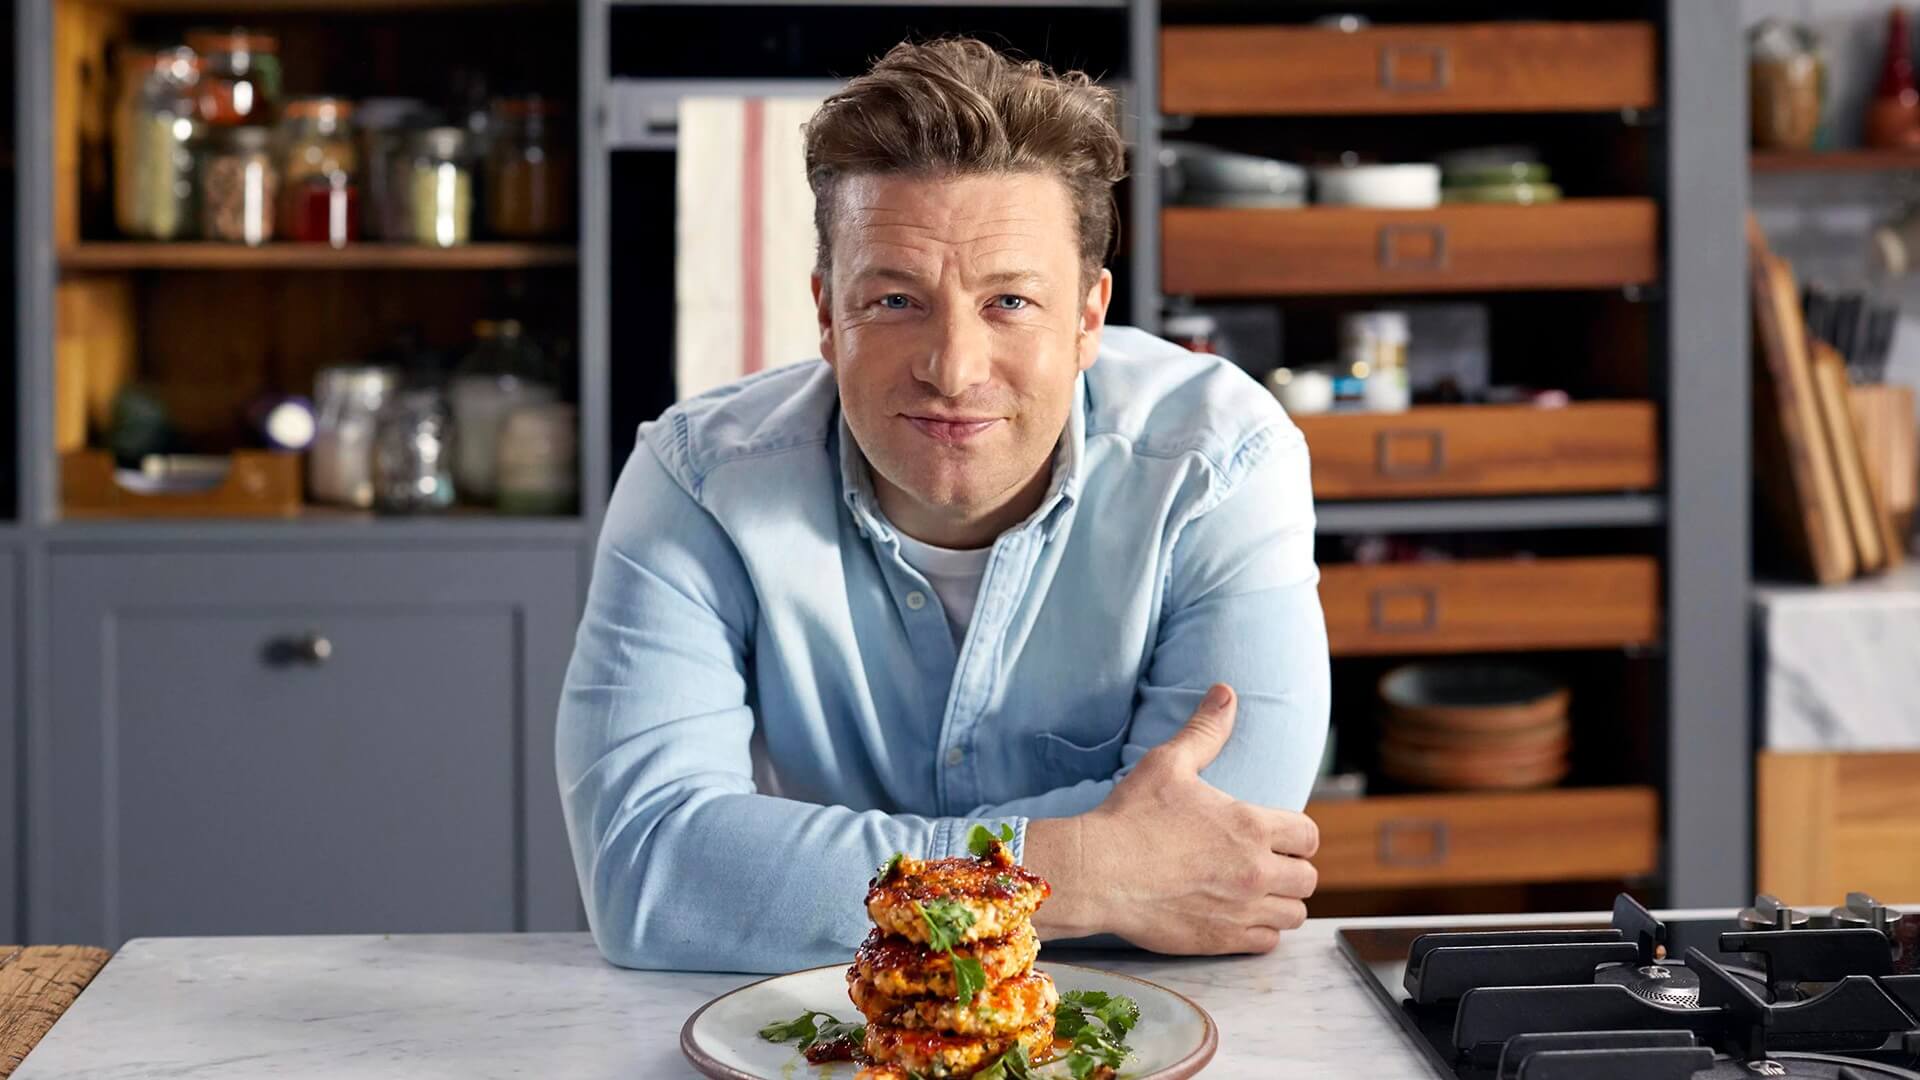 Who Is Jamie Oliver Dating?